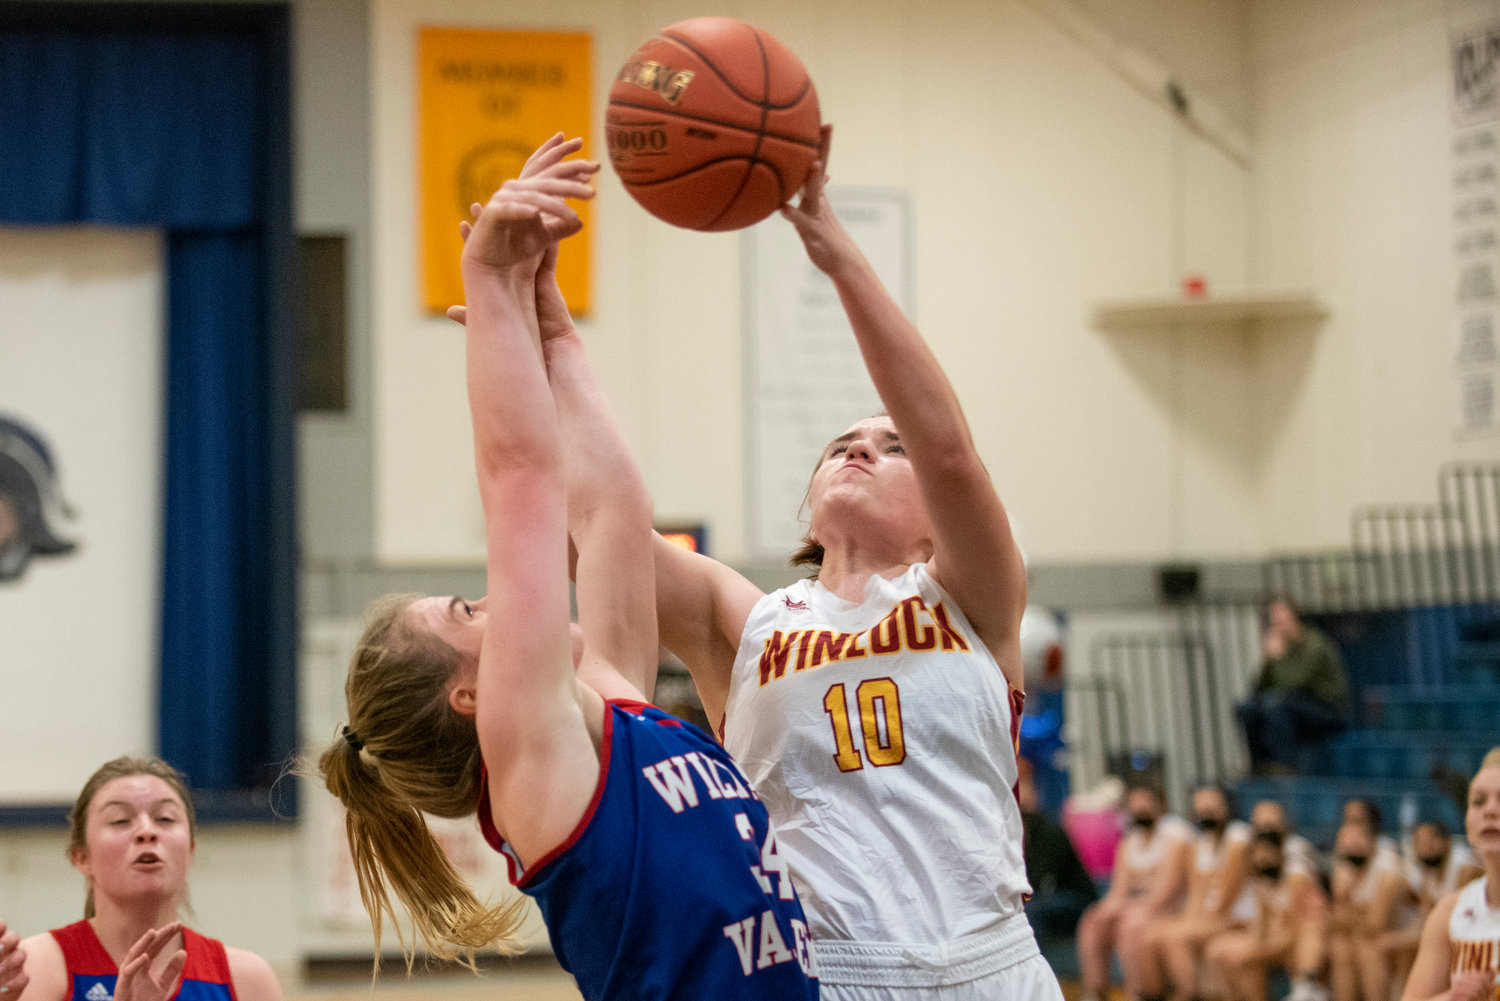 Winlock's Madison Vigre (10) battles for a rebound with a Willapa Valley player on Jan. 21.